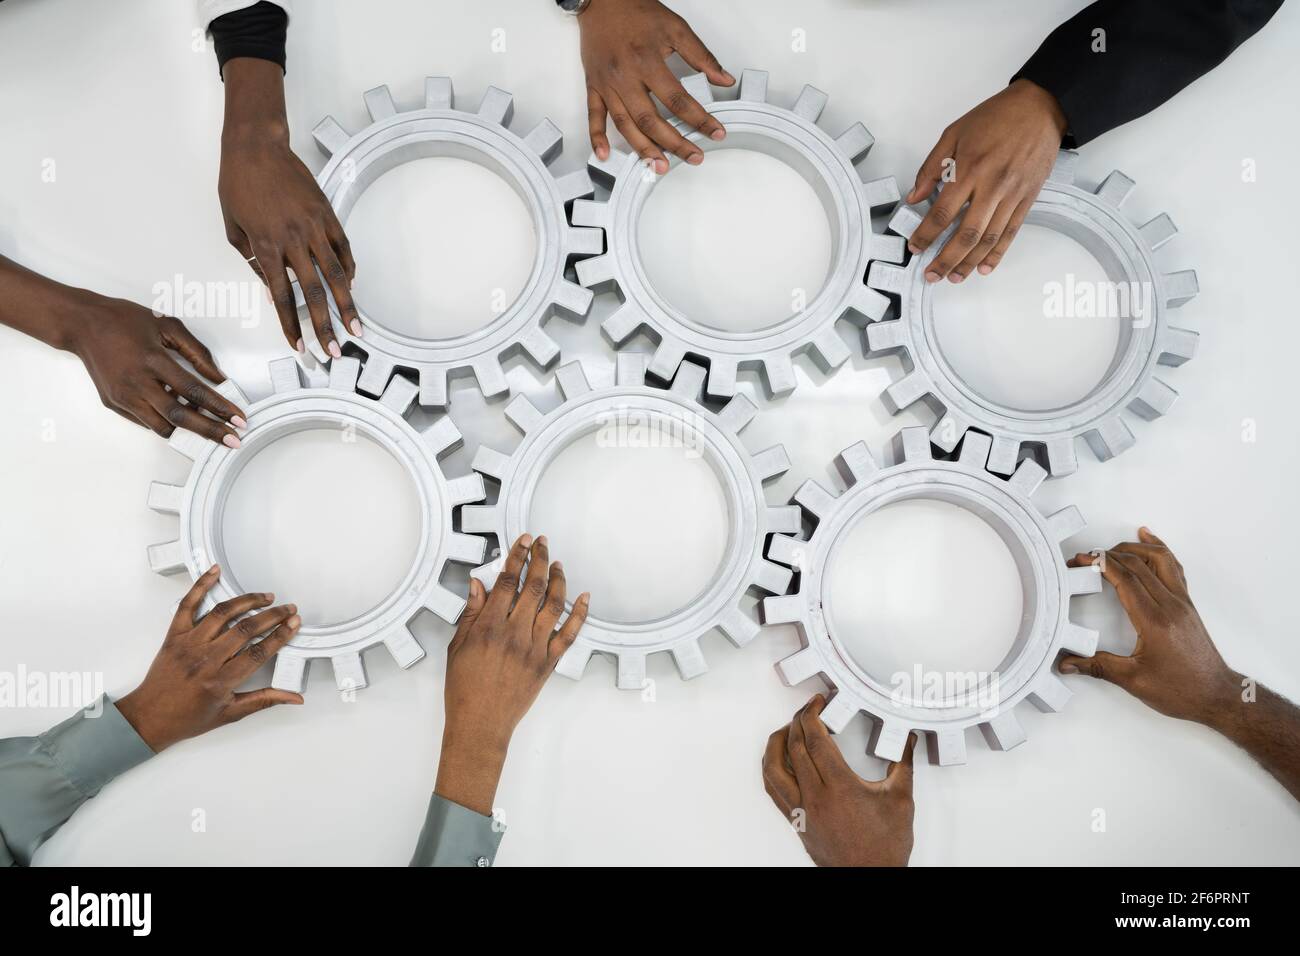 Business People Team Hands Connecting Gears. Implementation And Collaboration Stock Photo